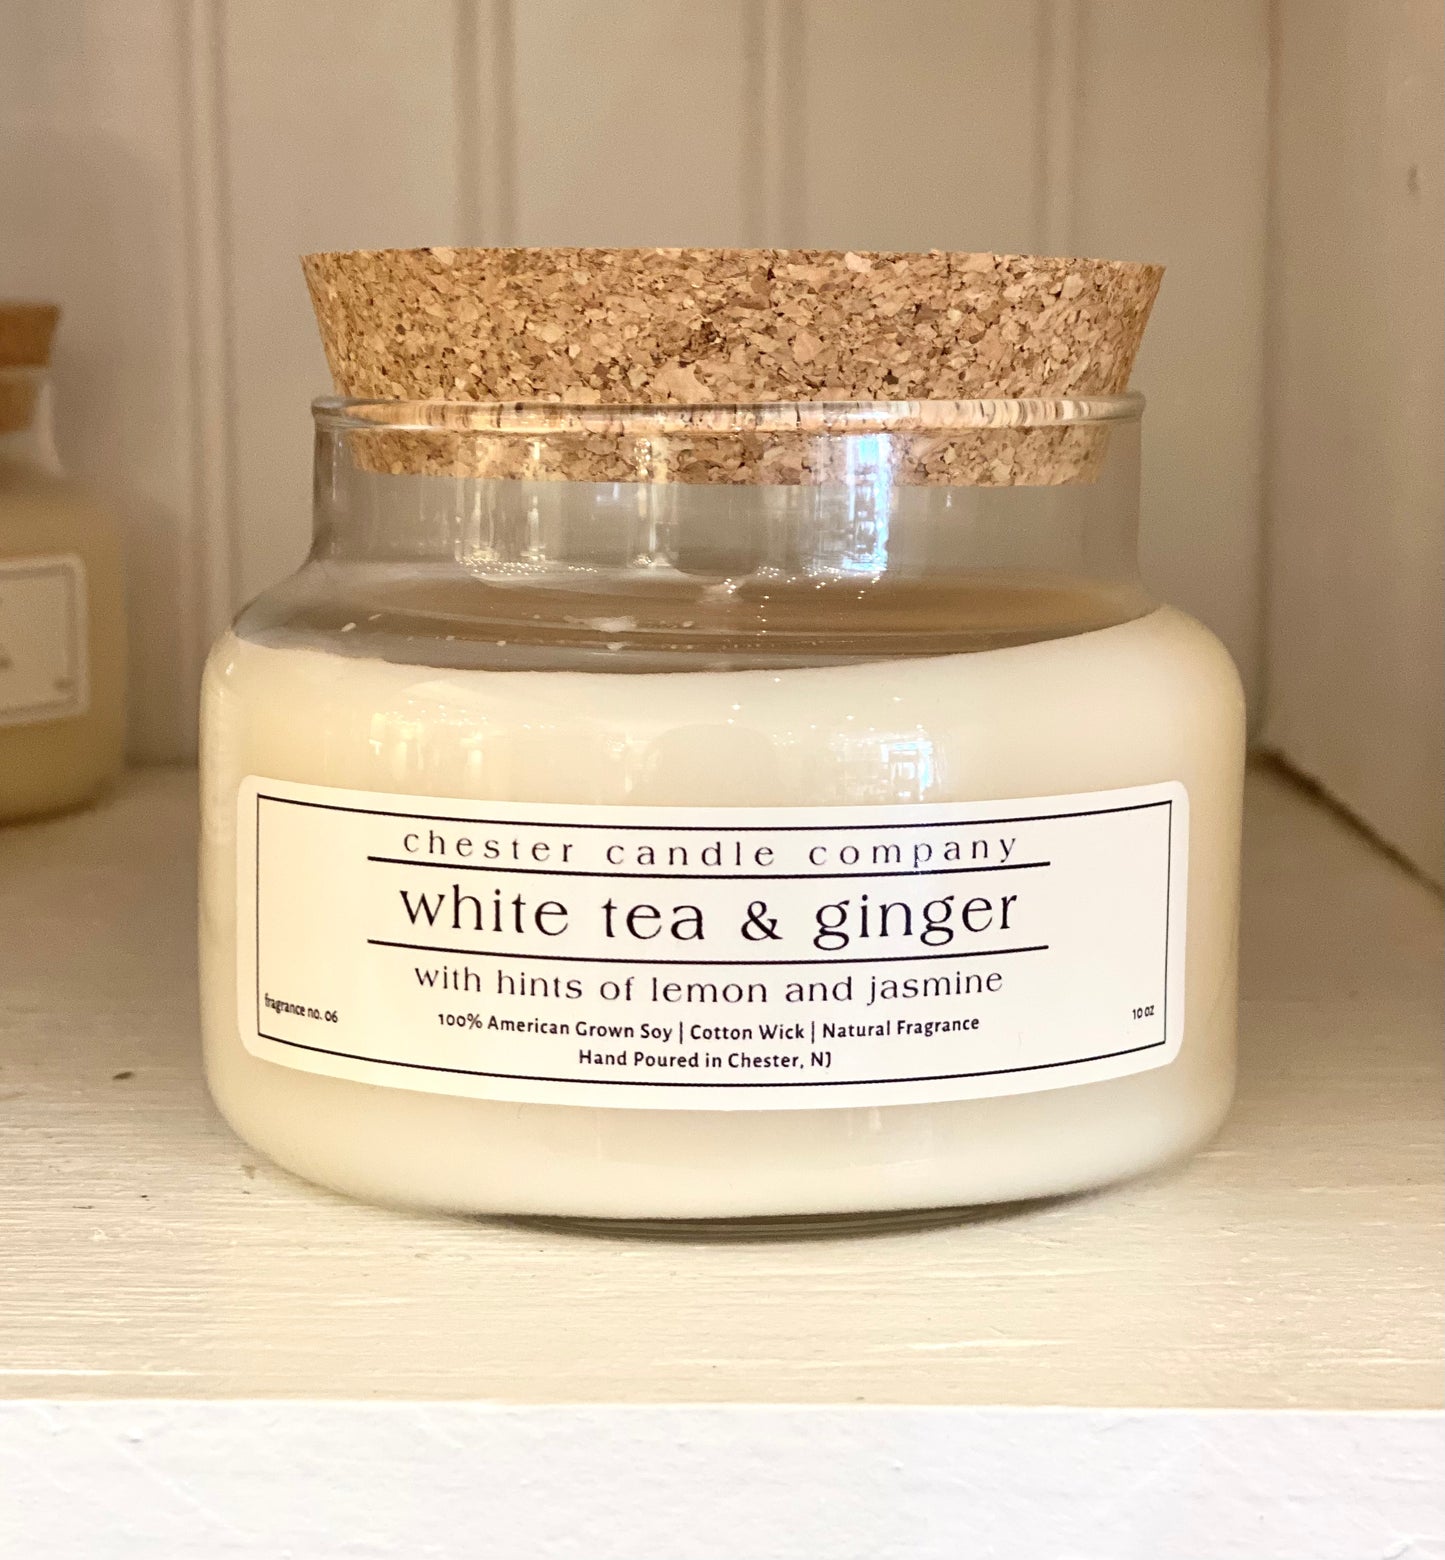 Natural Soy Wax Candle in a Clear Glass Apothecary-Style Jar and a Cork Lid. White Label on the Jar Reads "chester candle company. White tea & ginger with hints of lemon and jasmine. 100% American Grown Soy, Cotton Wick, Natural Fragrance. Fragrance No. 06 Hand Poured in Chester, NJ. 10oz”